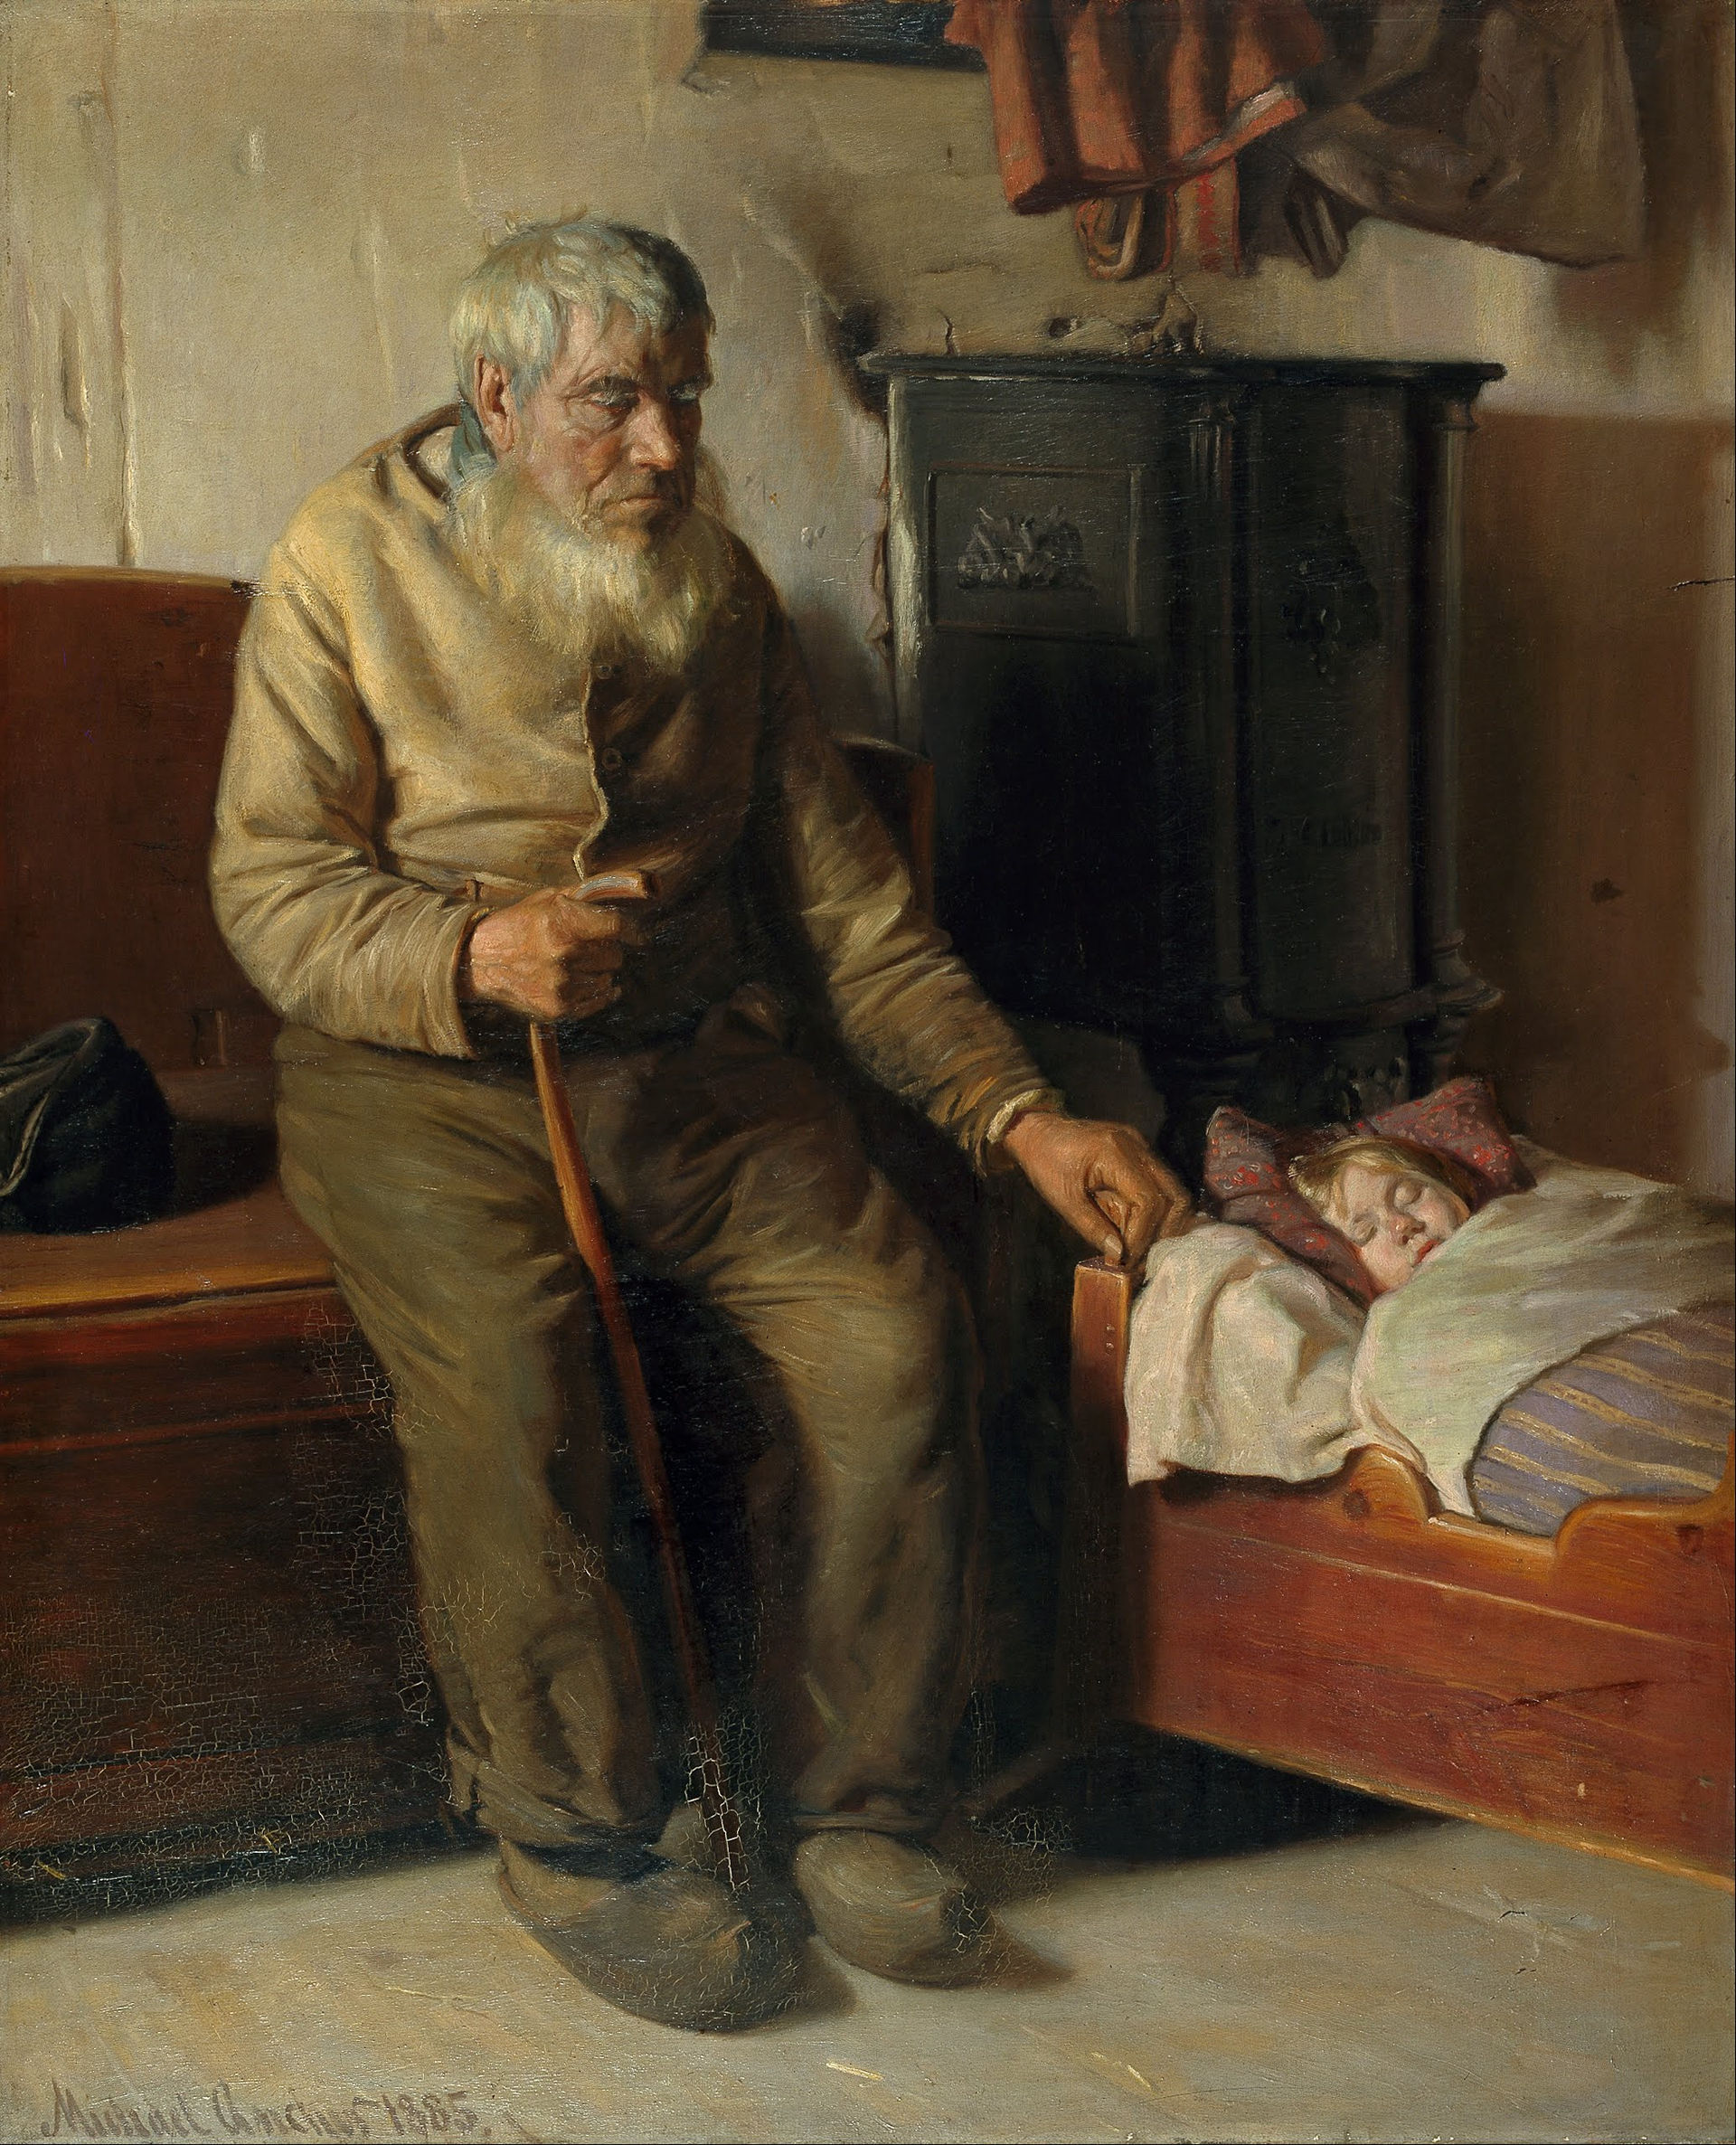 Inspiration: “Blind Kristian Minding A Child,” by Michael Ancher